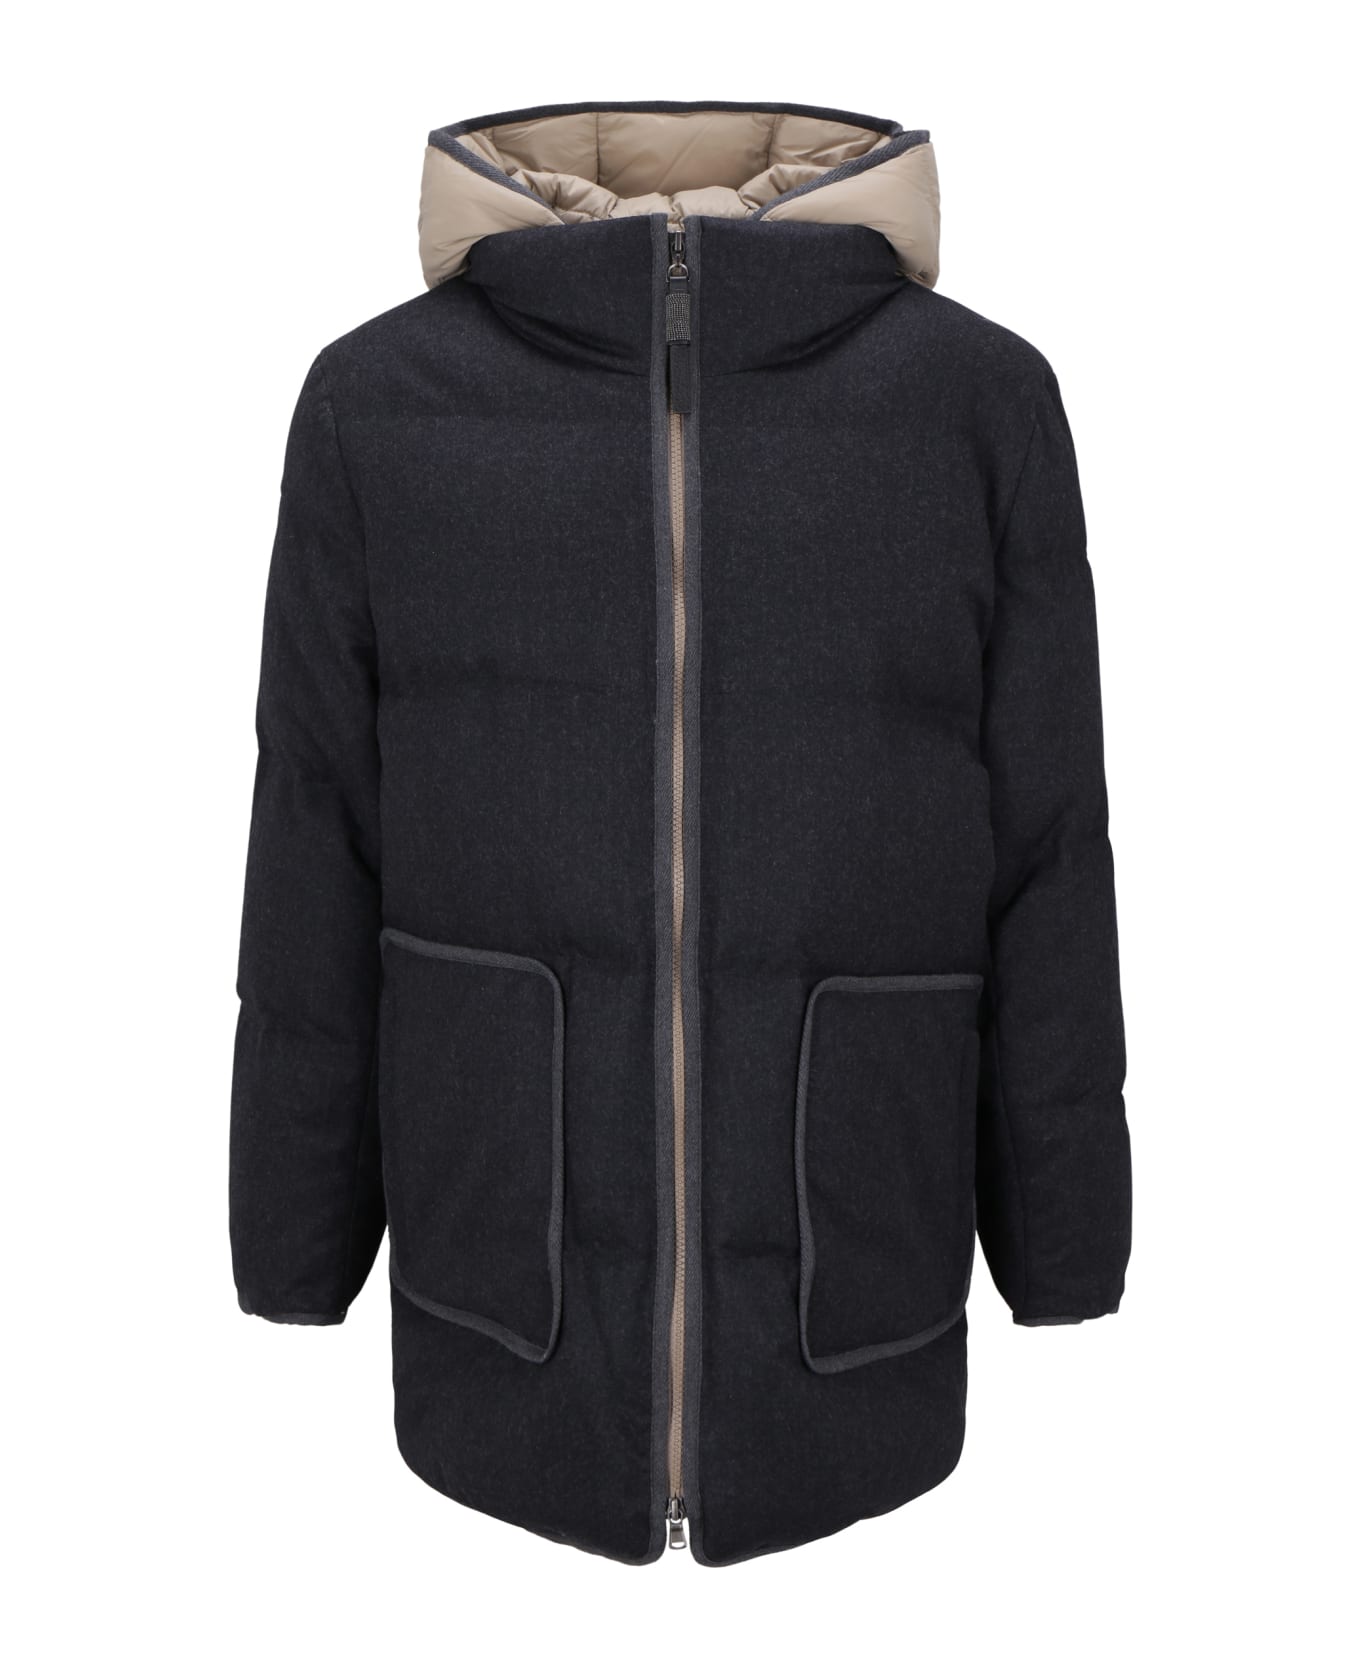 Brunello Cucinelli Long Down Jacket In Soft Wool Padded With Real Goose Down With Detachable Front With Hood. - Antracite